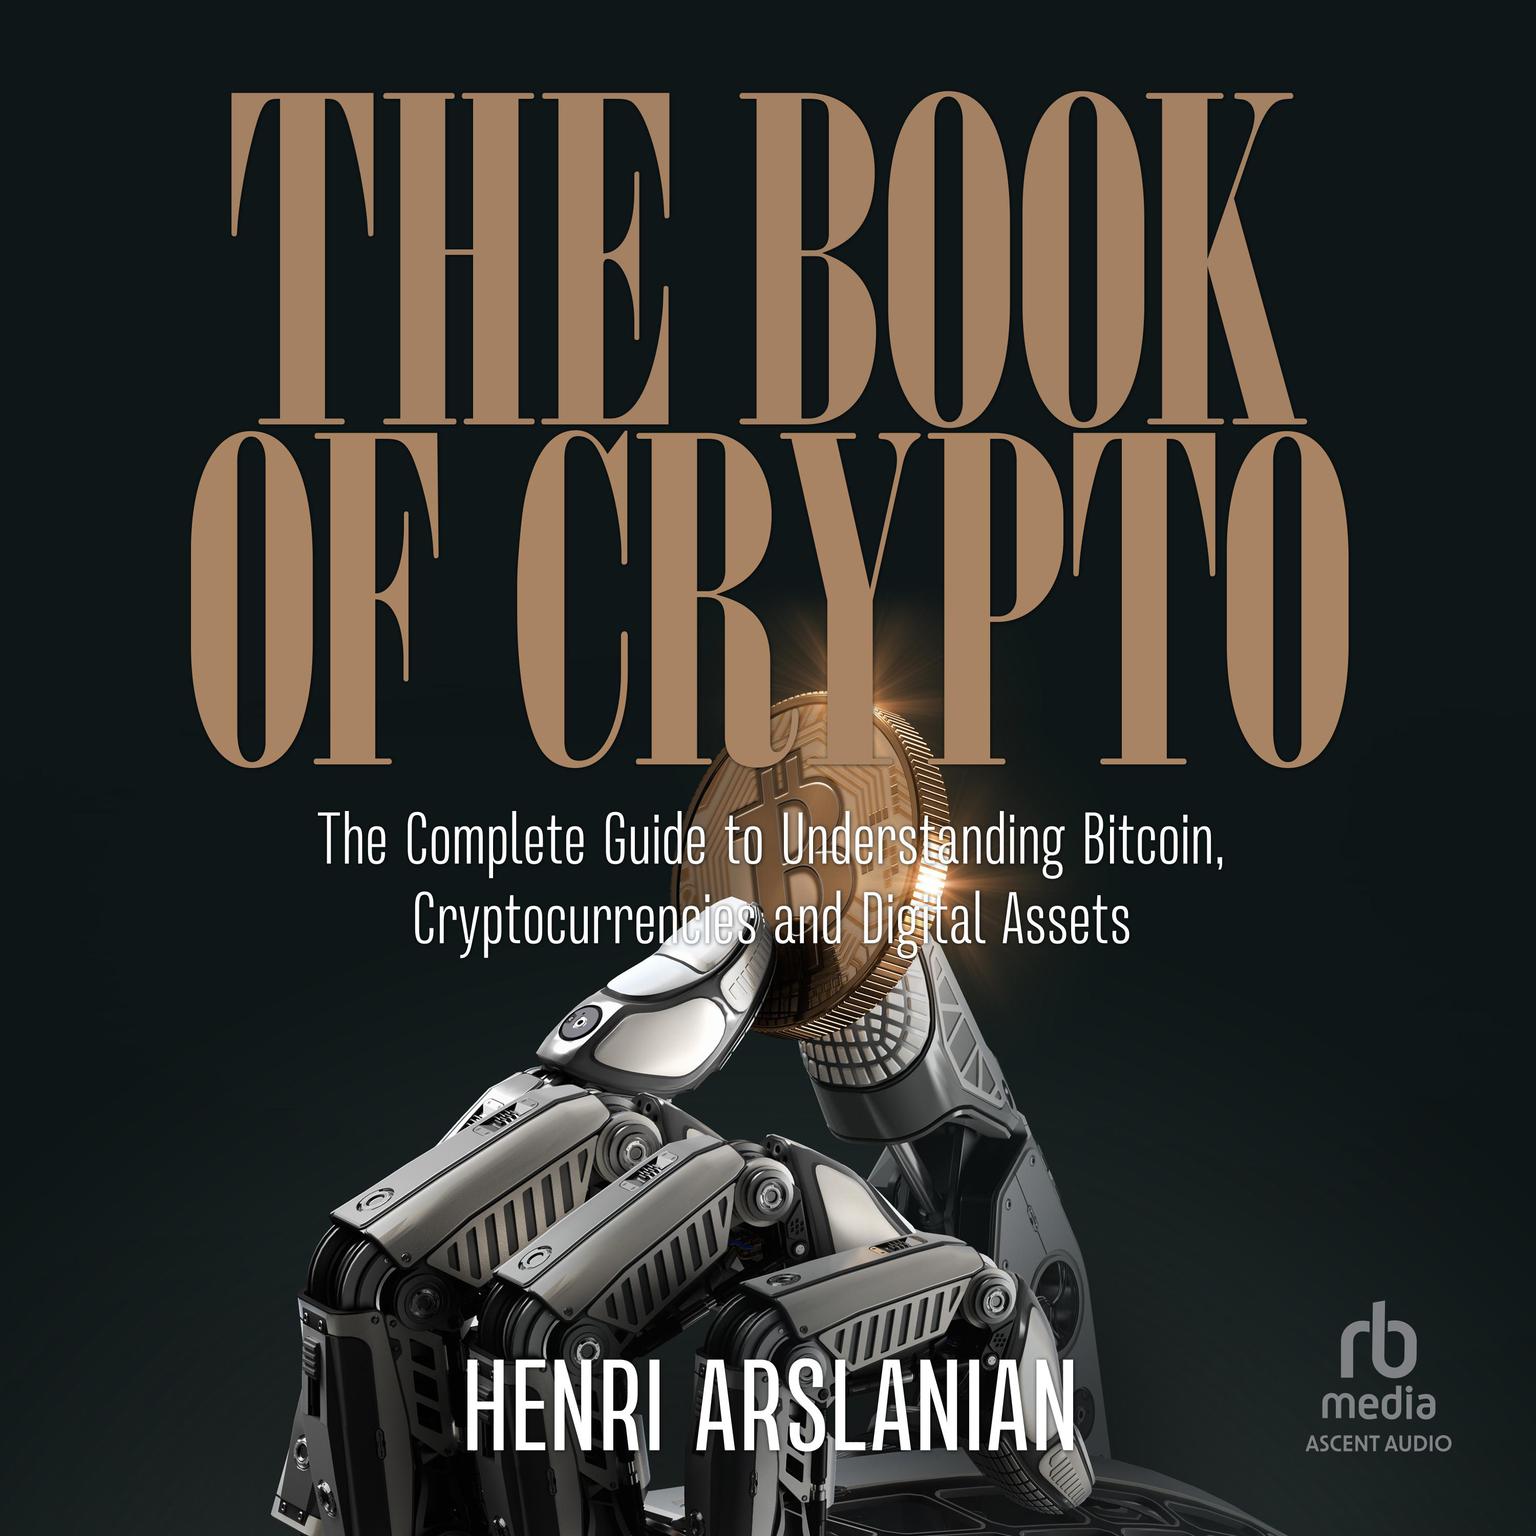 The Book of Crypto: The Complete Guide to Understanding Bitcoin, Cryptocurrencies and Digital Assets Audiobook, by Henri Arslanian